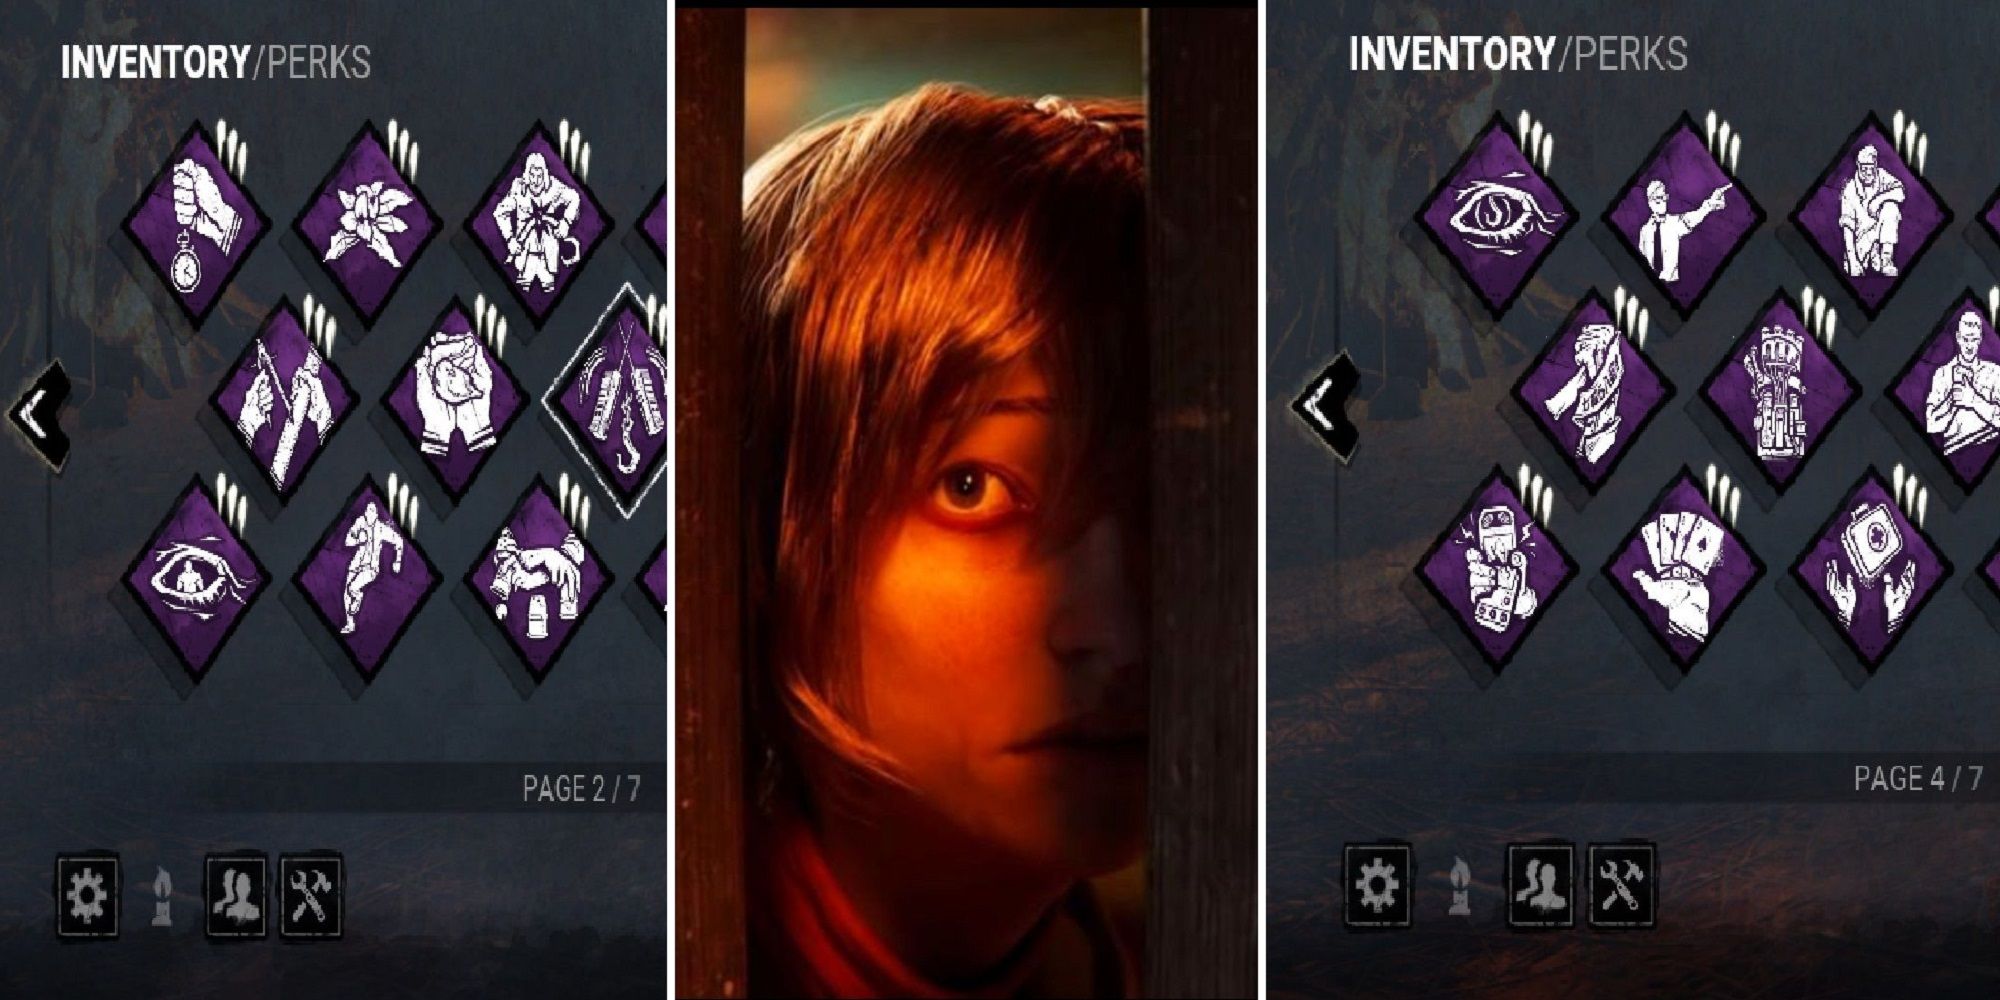 Dead By Daylight split image Cheryl Mason official art in center with screenshots of the game's perk selection menu on either side.